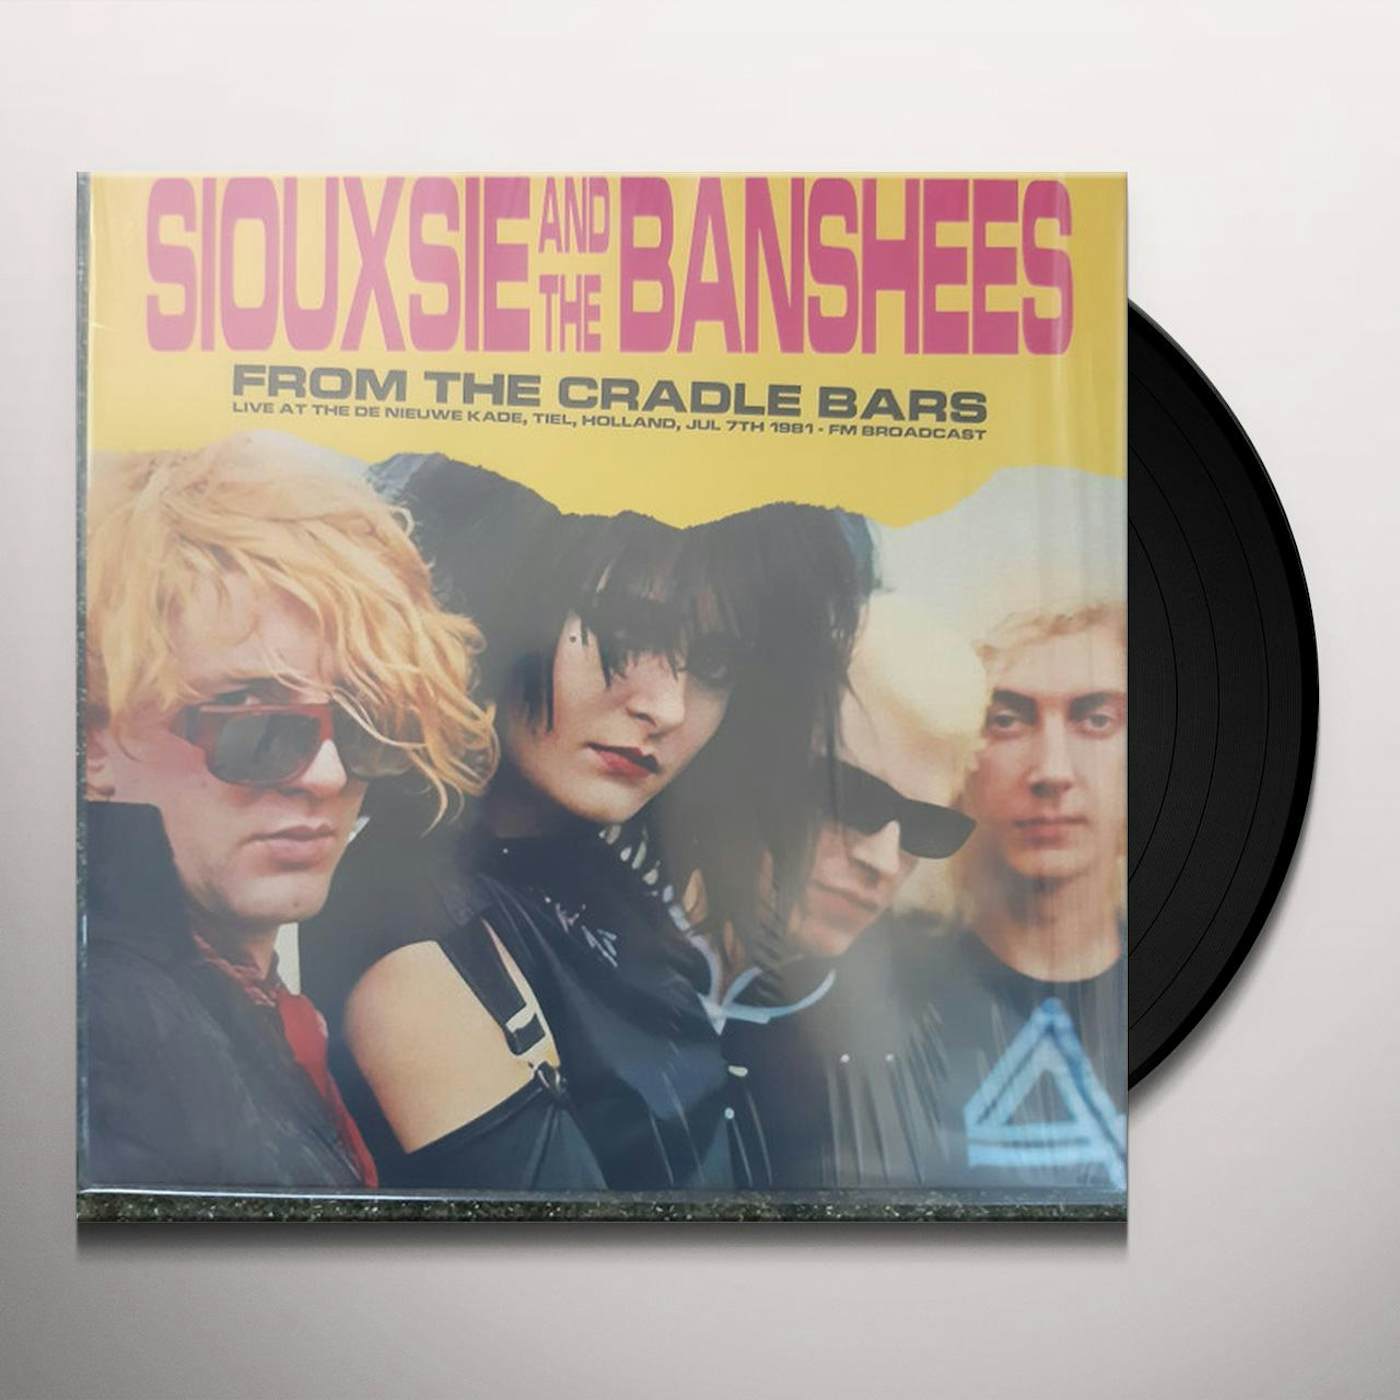 Siouxsie and the Banshees FROM THE CRADLE BARS: LIVE AT THE DE NIEUWE KADE, TIEL, HOLLAND, JUL 7TH 1981 - FM BROADCAST Vinyl Record